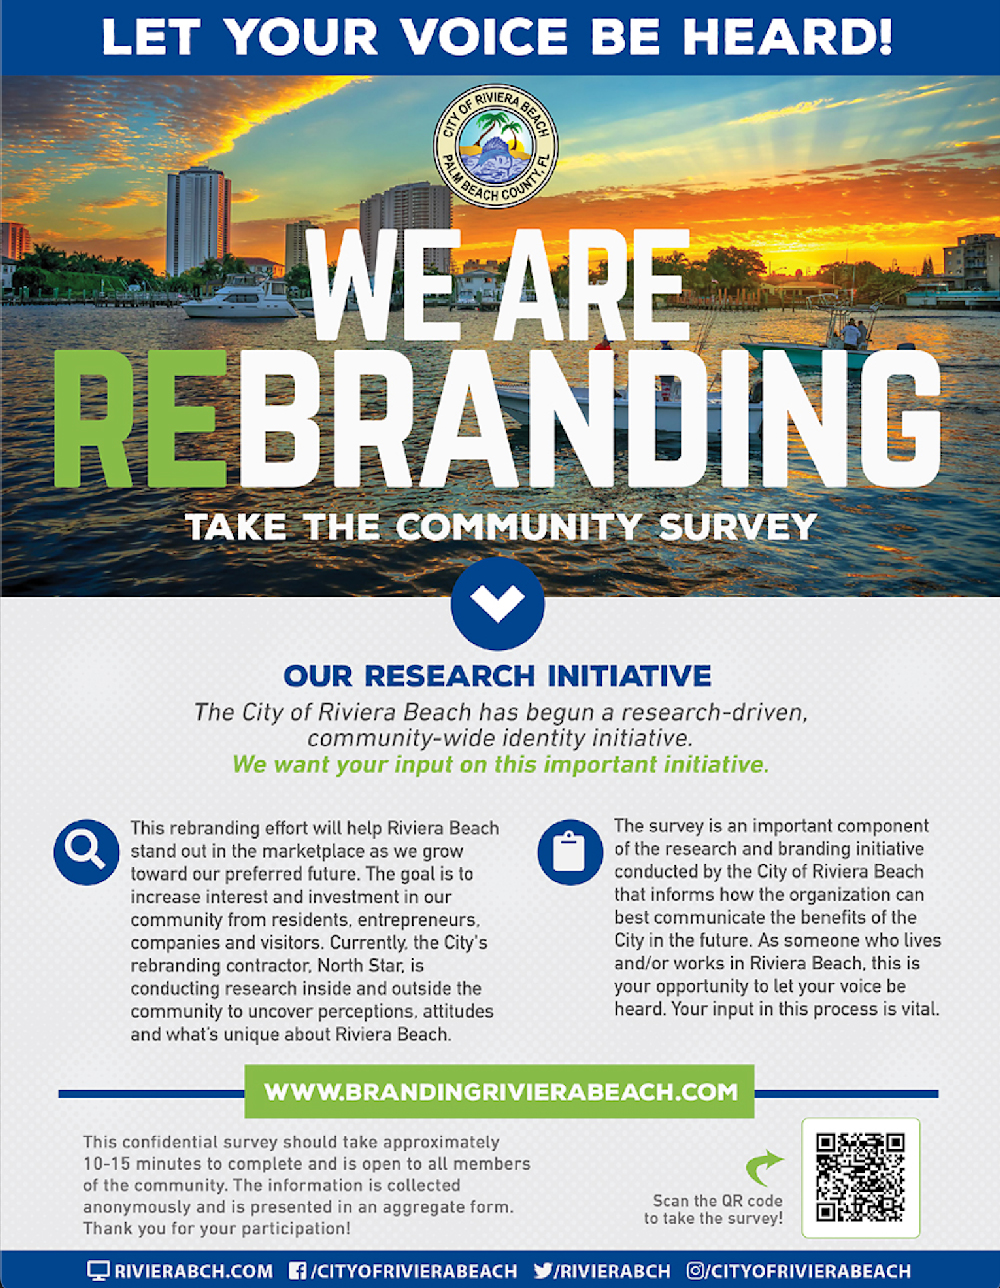 WE ARE REBRANDING TAKE THE COMMUNITY SURVEY OUR RESEARCH INITIATIVE The City of Riviera Beach has begun a research-driven, community-wide identity initiative. We want your input on this important initiative. This rebranding effort will help Riviera Beach stand out in the marketplace as we grow toward our preferred future. The goal is to increase interest and investment in our community from residents. entrepreneurs. companies and visitors. Currently, the City's rebranding contractor, North Star, is conducting research inside and outside the community to uncover perceptions, attitudes and what's unique about Riviera Beach. The survey is an important component of the research and branding initiative conducted by the City of Riviera Beach that informs how the organization can best communicate the benefits of the City in the future. As someone who lives and/or works in Riviera Beach, this is your opportunity to let your voice be heard. Your input in this process is vital.